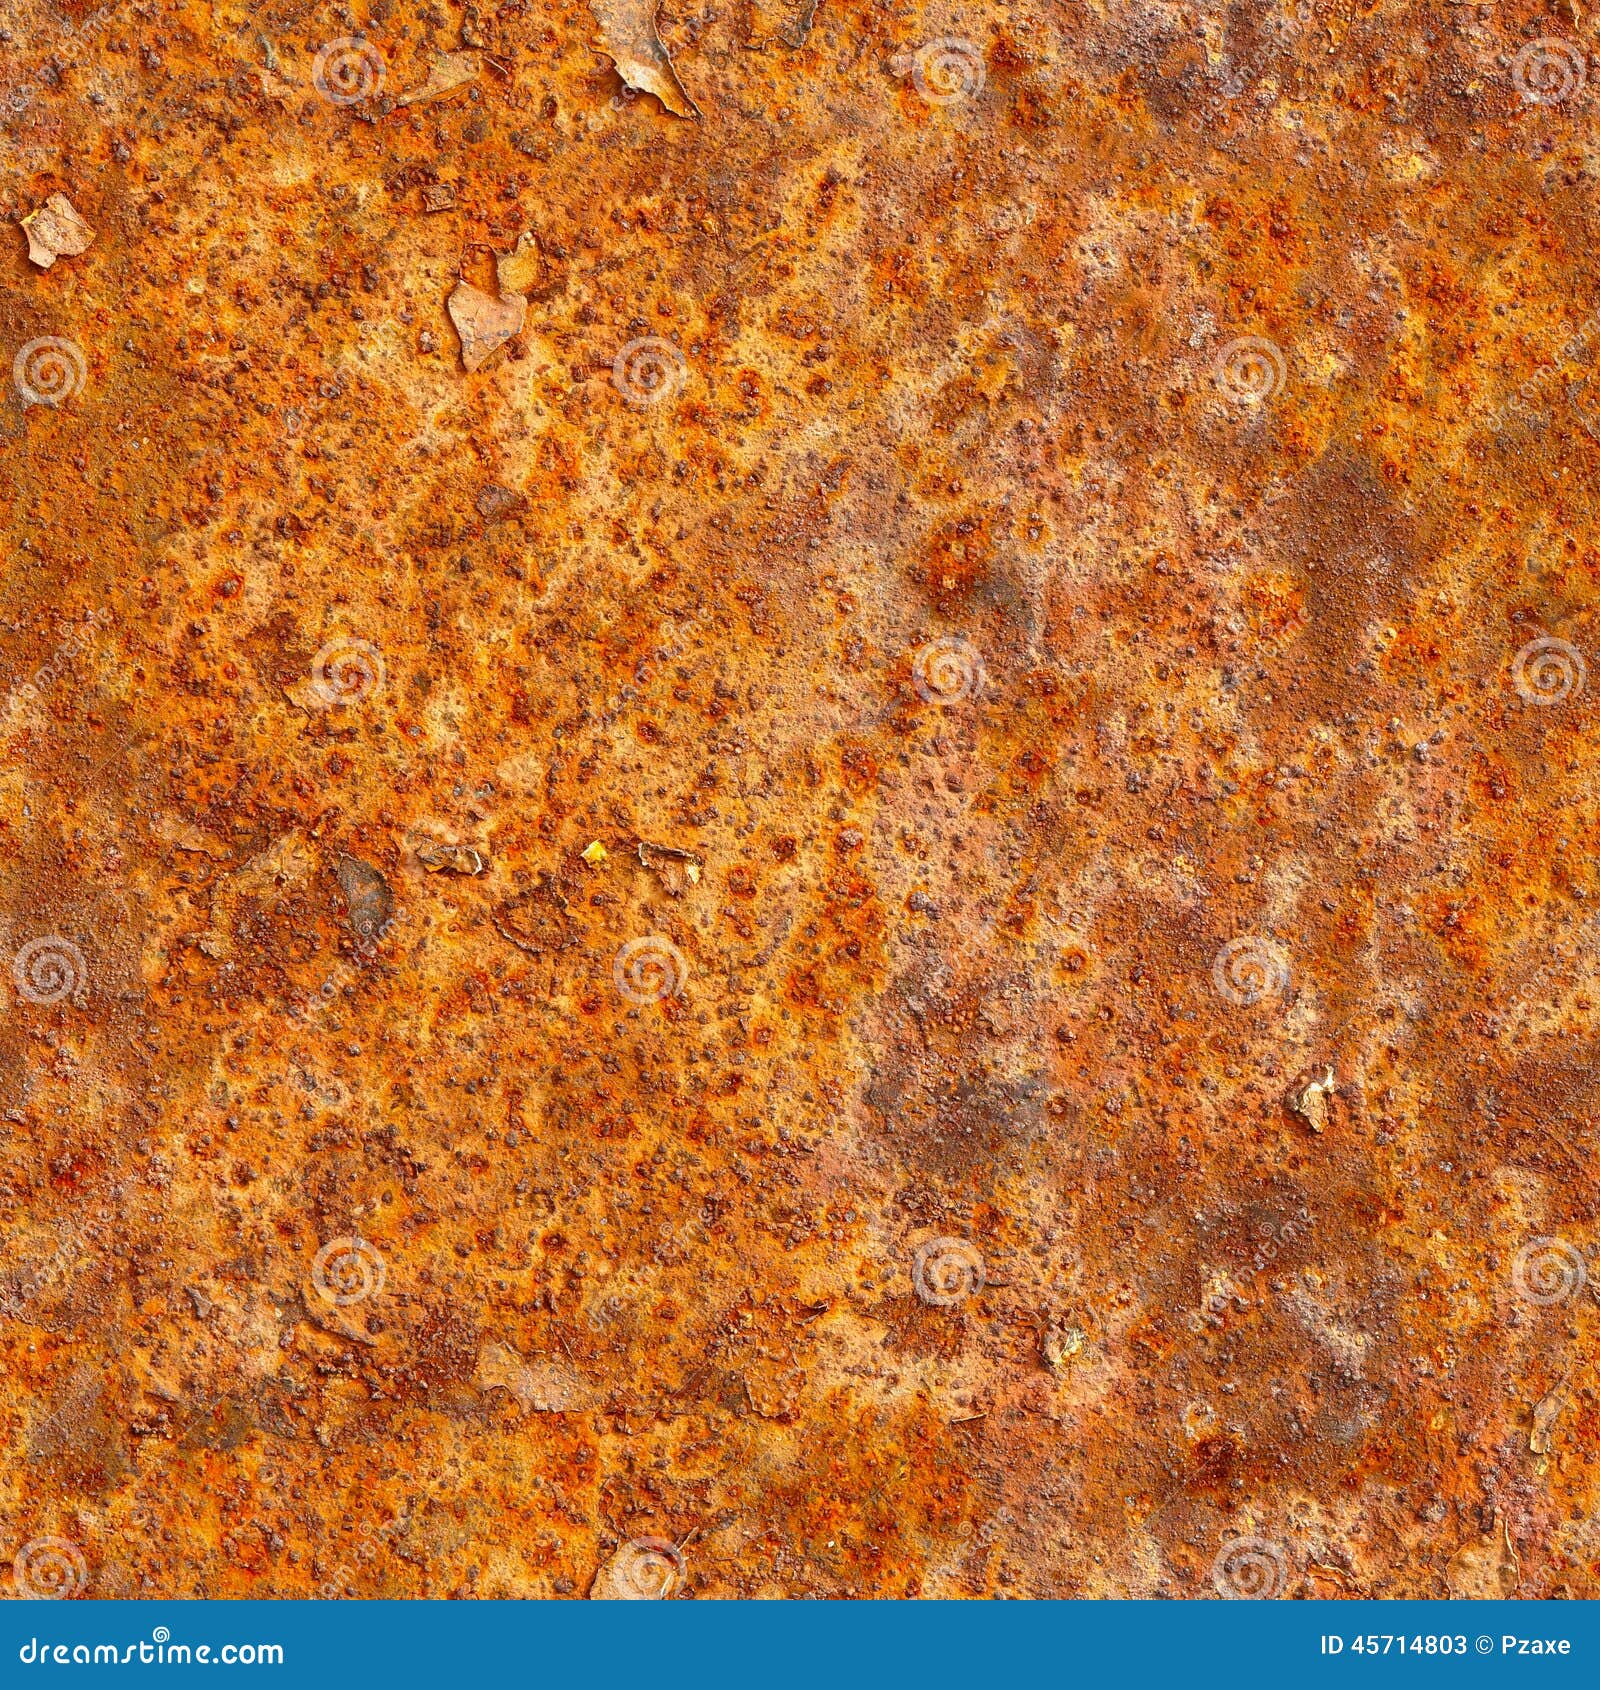 seamless texture of rusty metal surface. grunge photographic pat